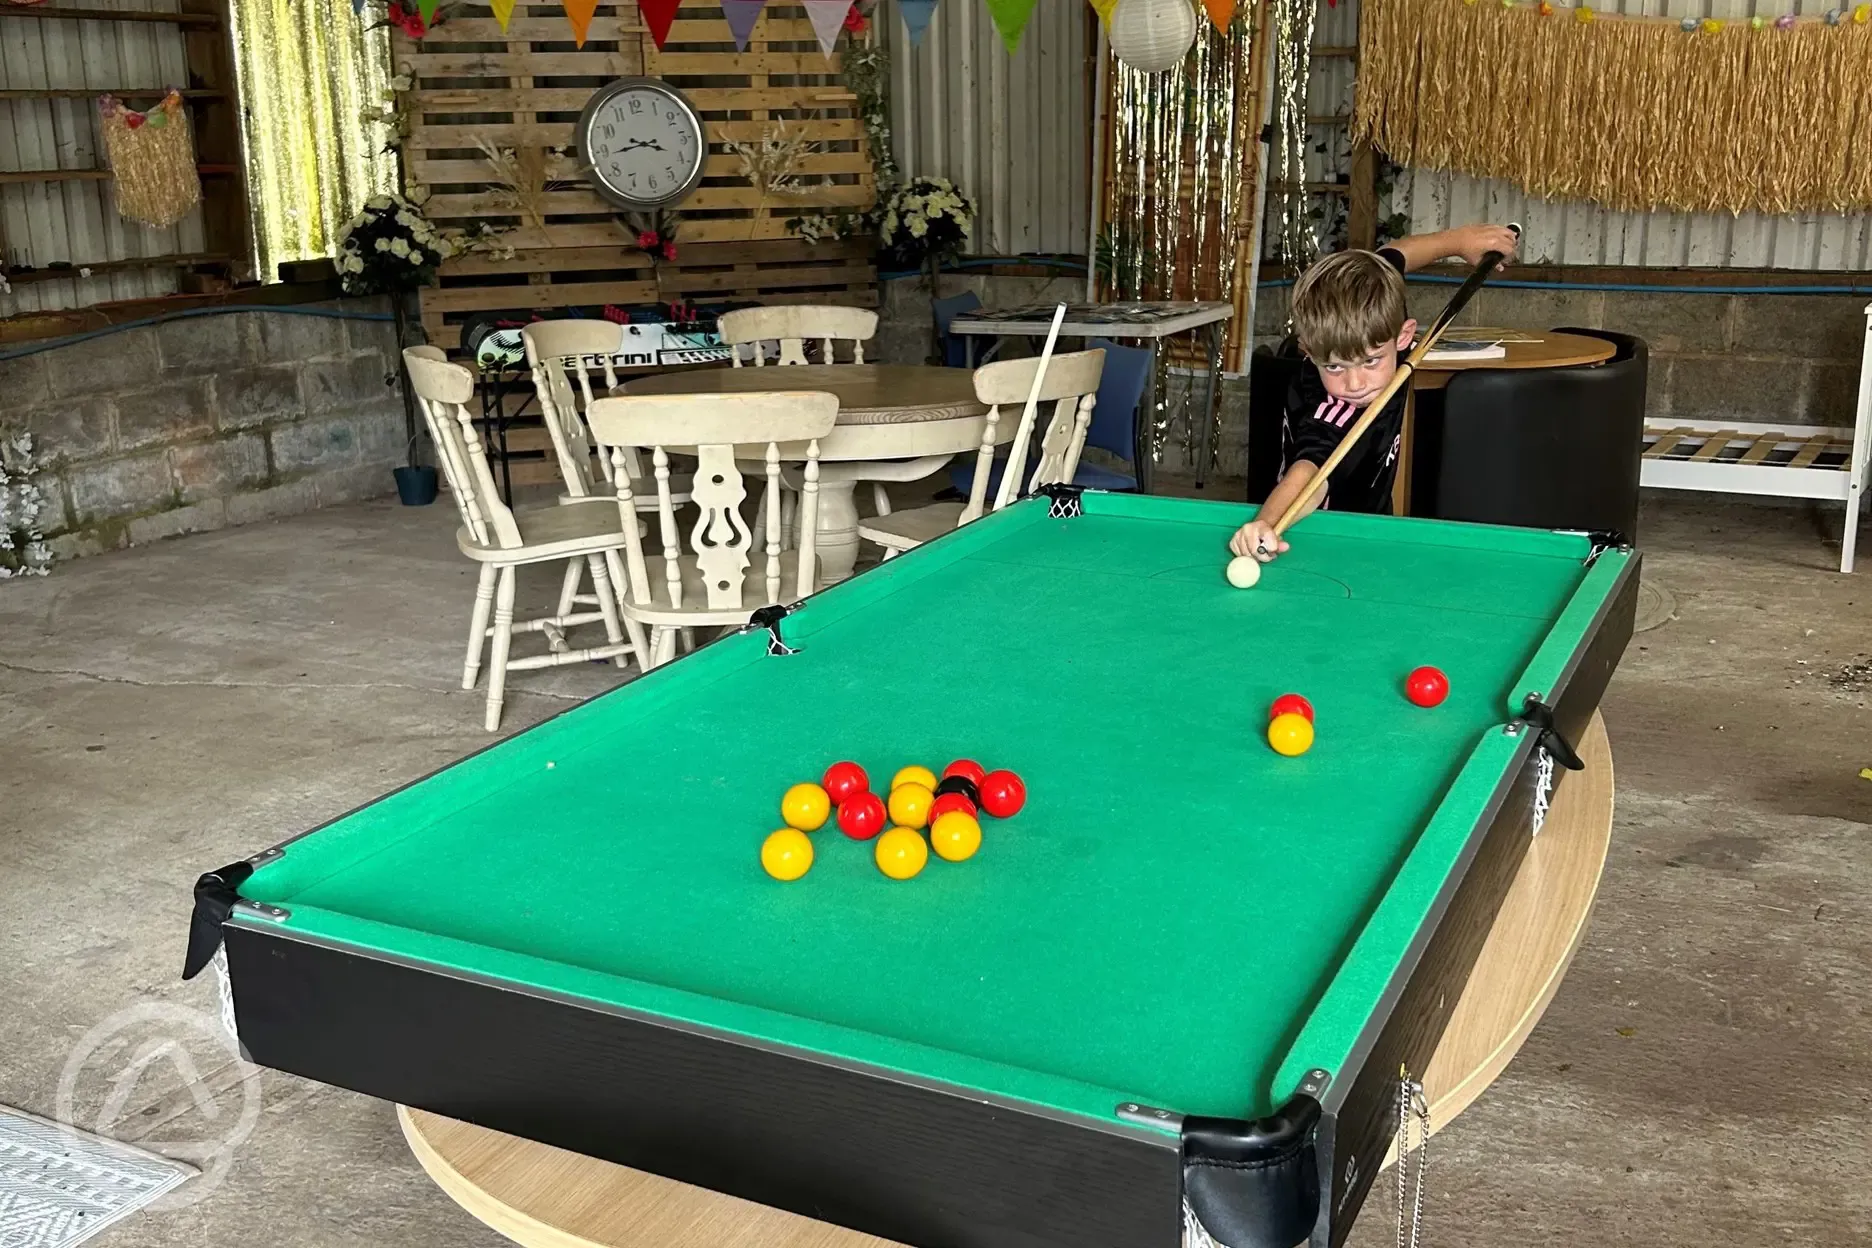 Communal area with pool table, football table and games